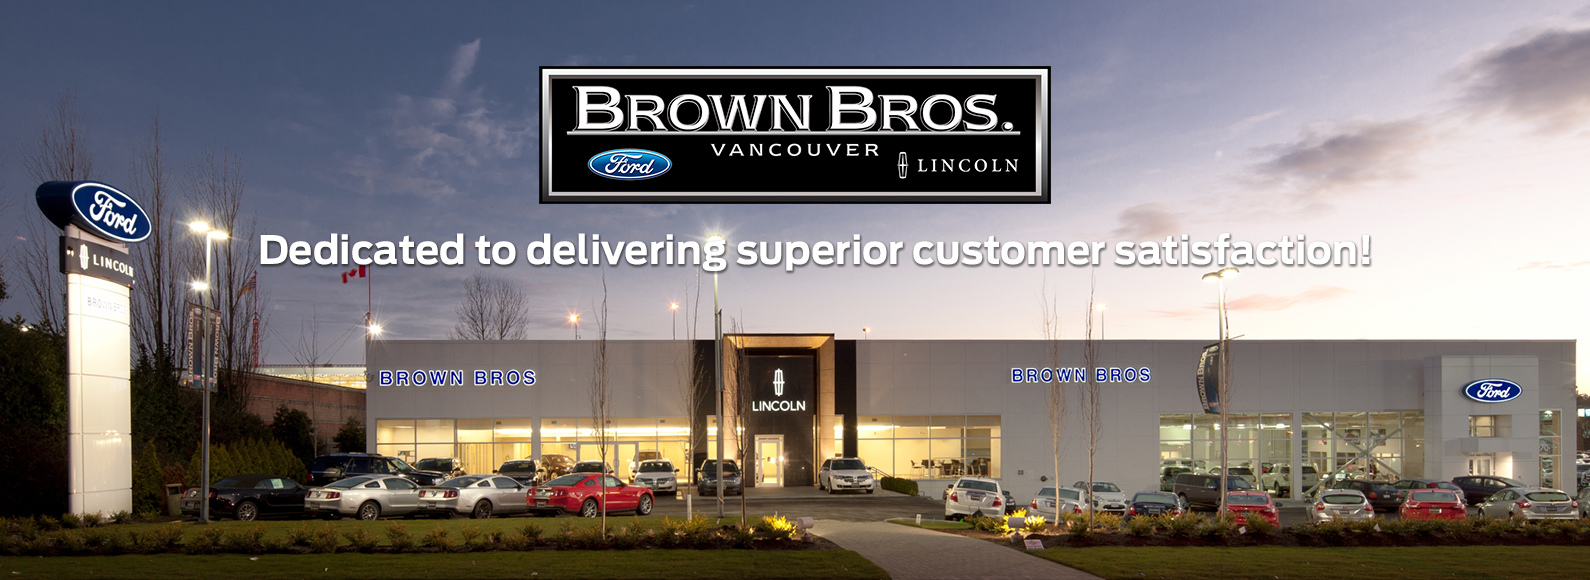 Brown bros ford lincoln #1